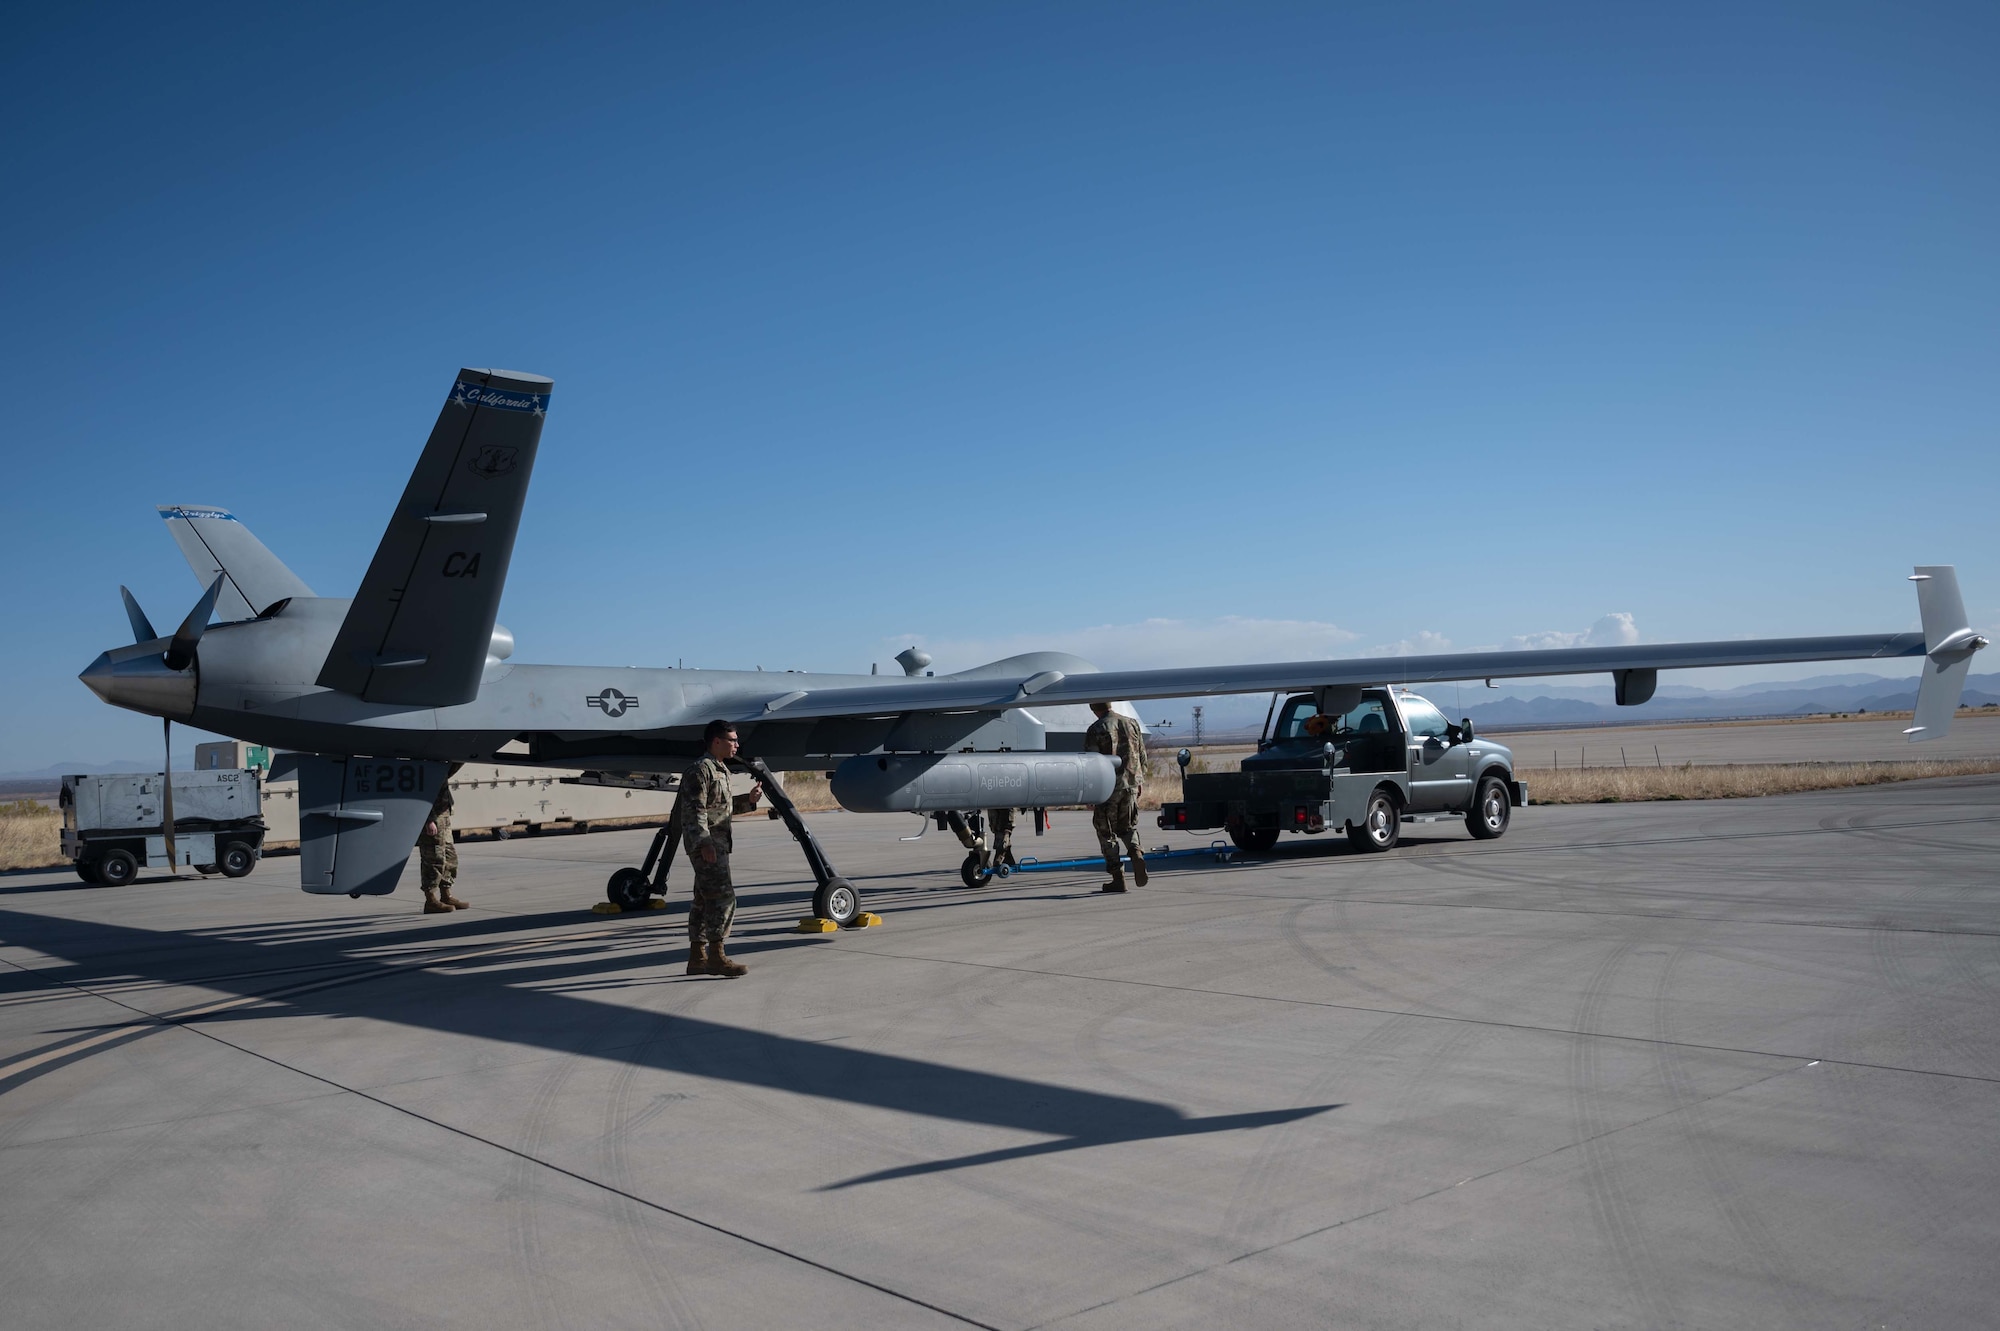 Airmen assigned to the 214 LRE at U.S. Army Fort Huachuca, Arizona, prepare an MQ-9 Reaper for an operational assessment flight with the REAP 2.0 payload on March 11.